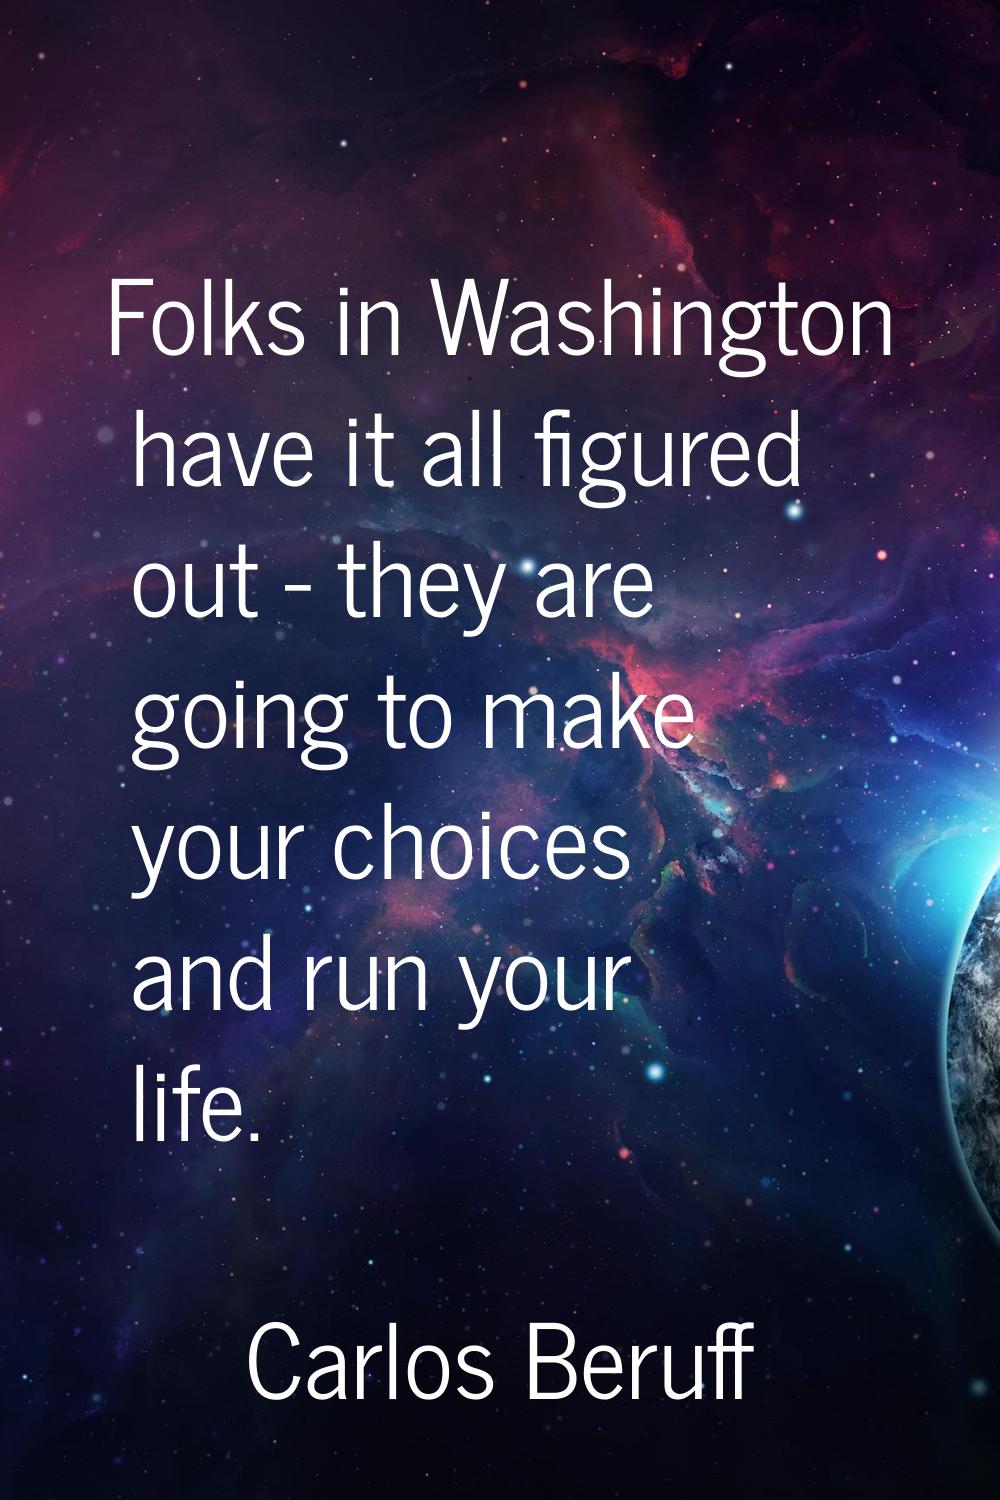 Folks in Washington have it all figured out - they are going to make your choices and run your life